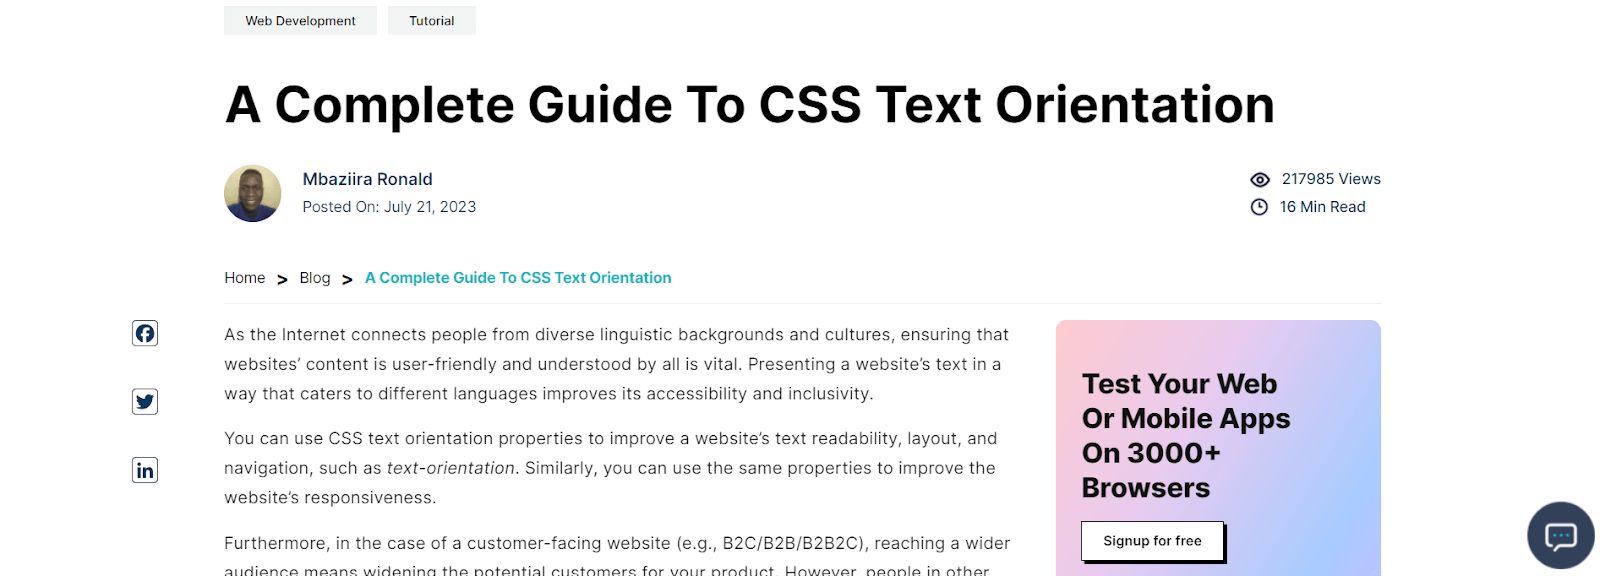 Guide To CSS Text Orientation